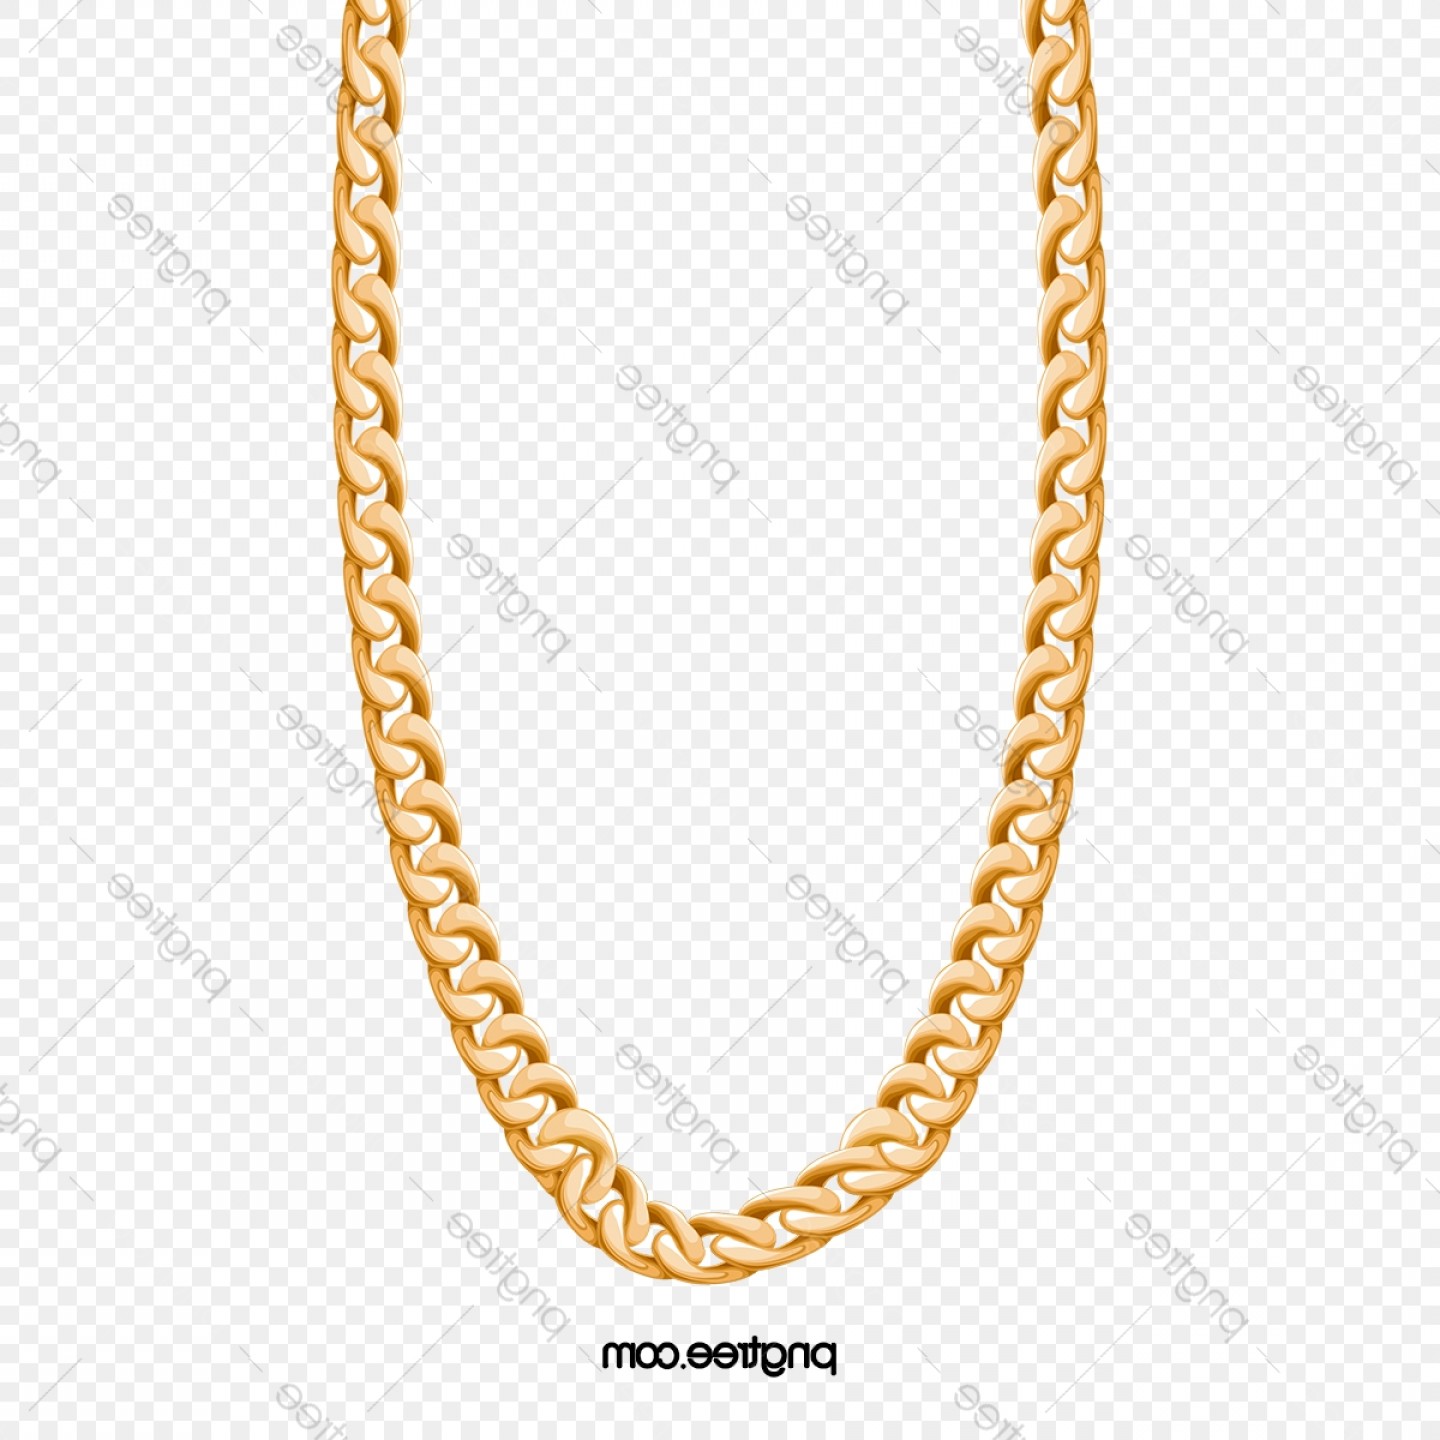 Latest Gold Chain Design Silver Chain Png Chain Vector Png.